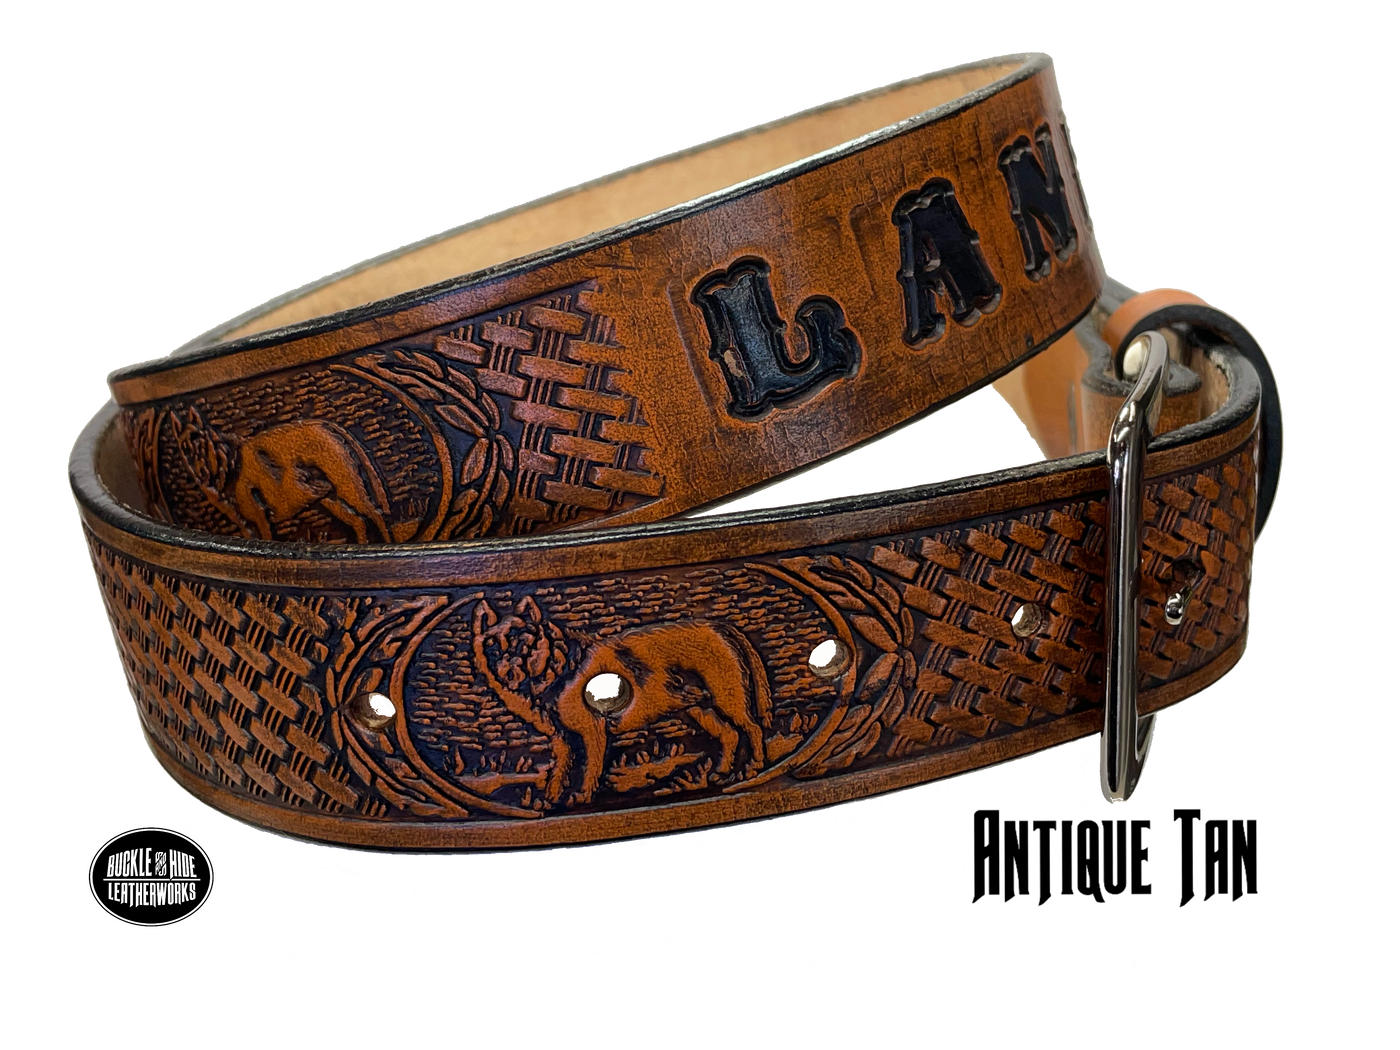 Are you a "Lone Wolf"? Let the world know with this Veg tan leather belt, just over 1/8 thick and complete with an optional name feature. Complete with snaps for easy buckle change. Be proud of your individualism and make a statement with this belt, made in the small town of Smyrna, TN, just outside of Nashville.